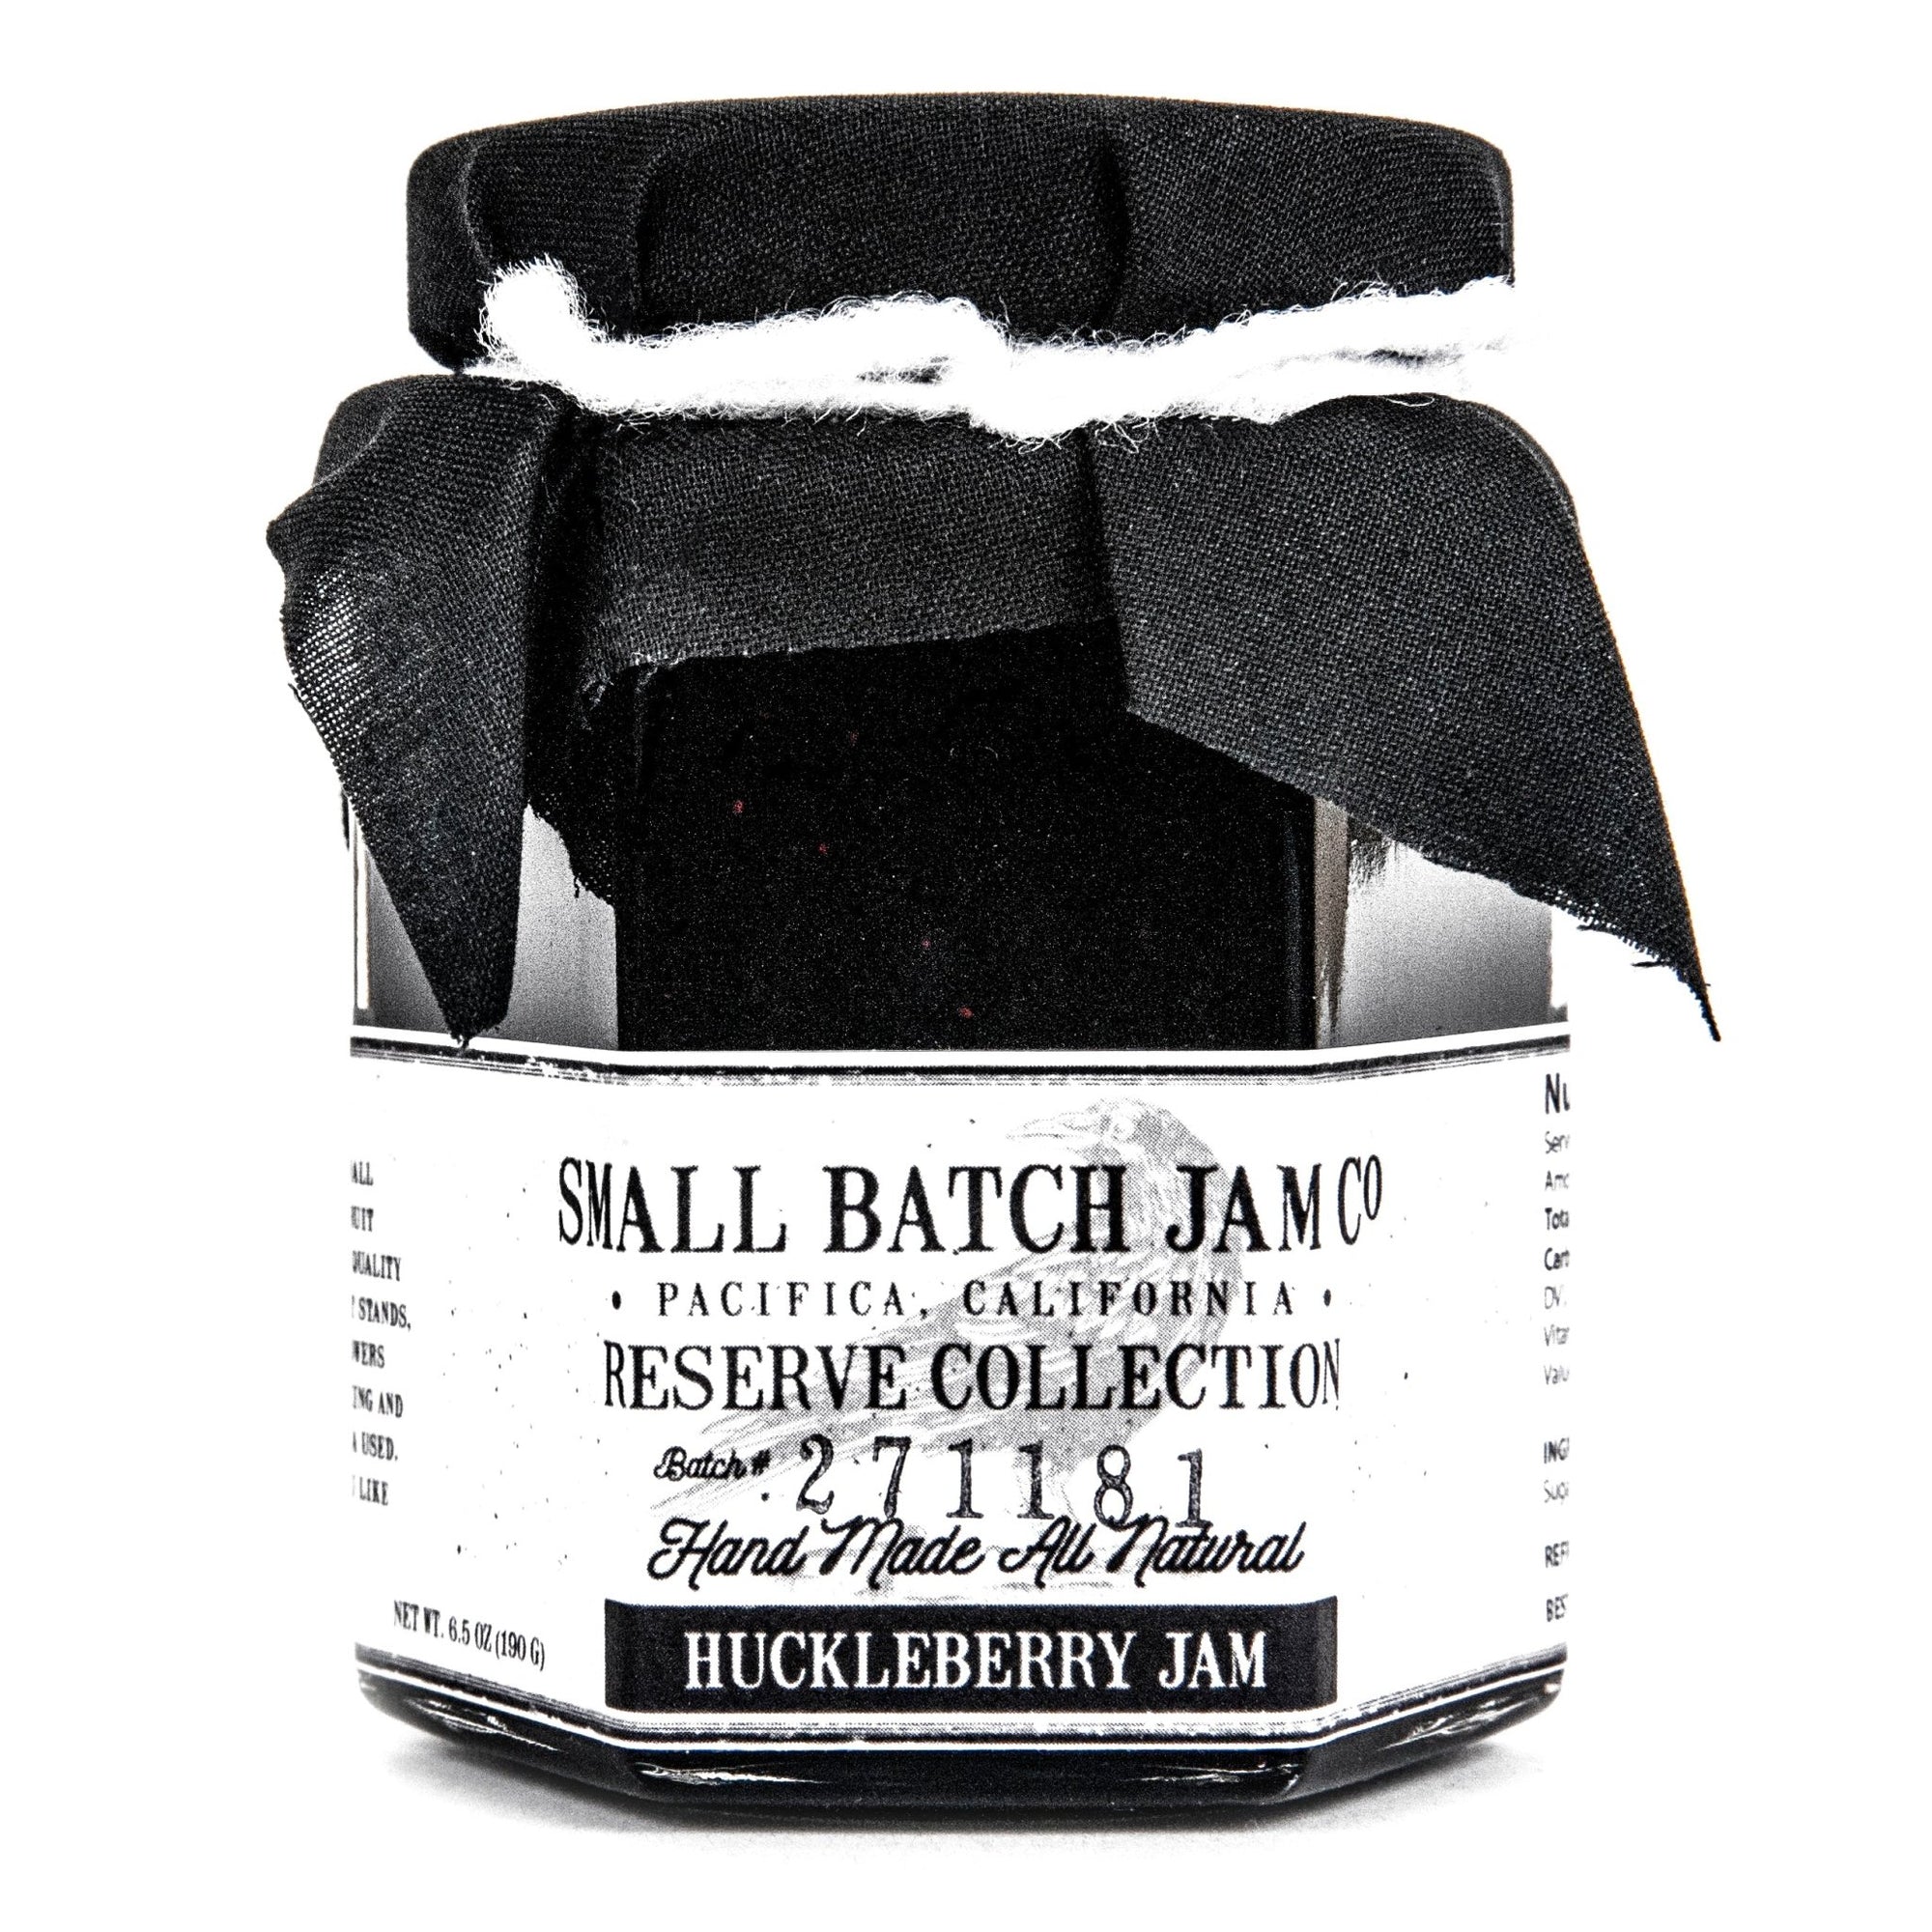 Huckleberry Jam - Reserve Collection - Small Batch Jam Co